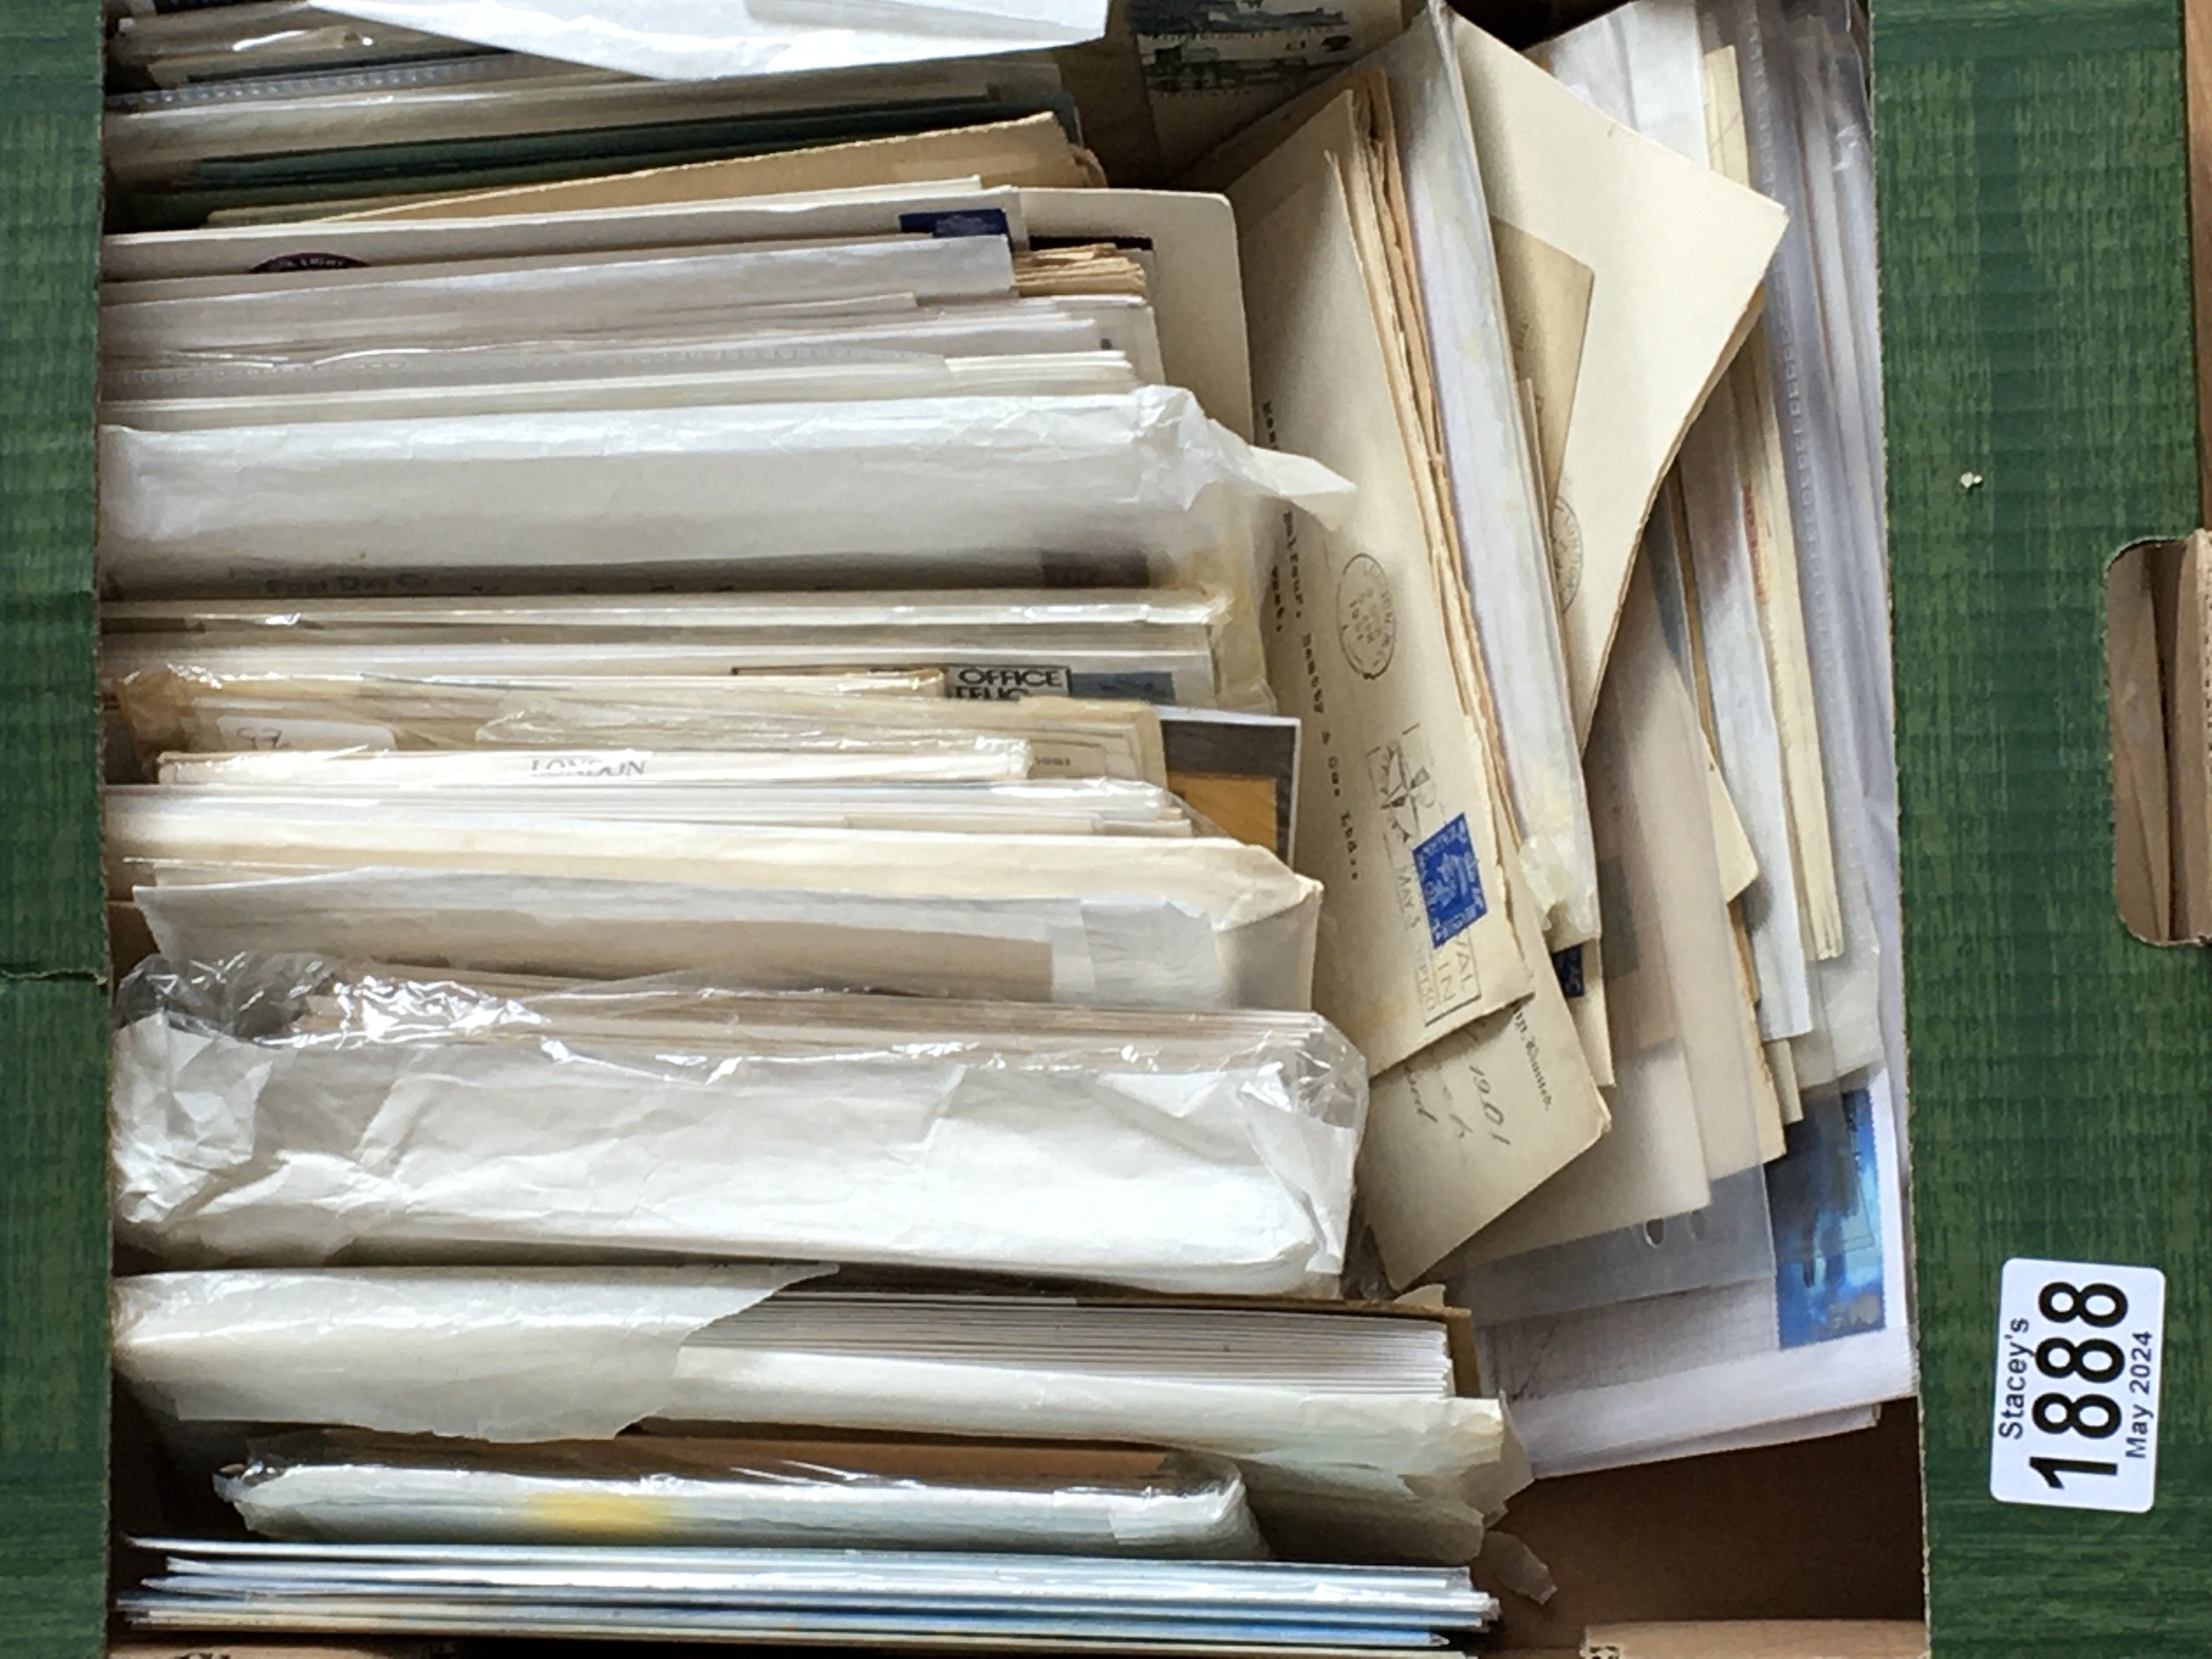 A box containing stamp covers and envelopes